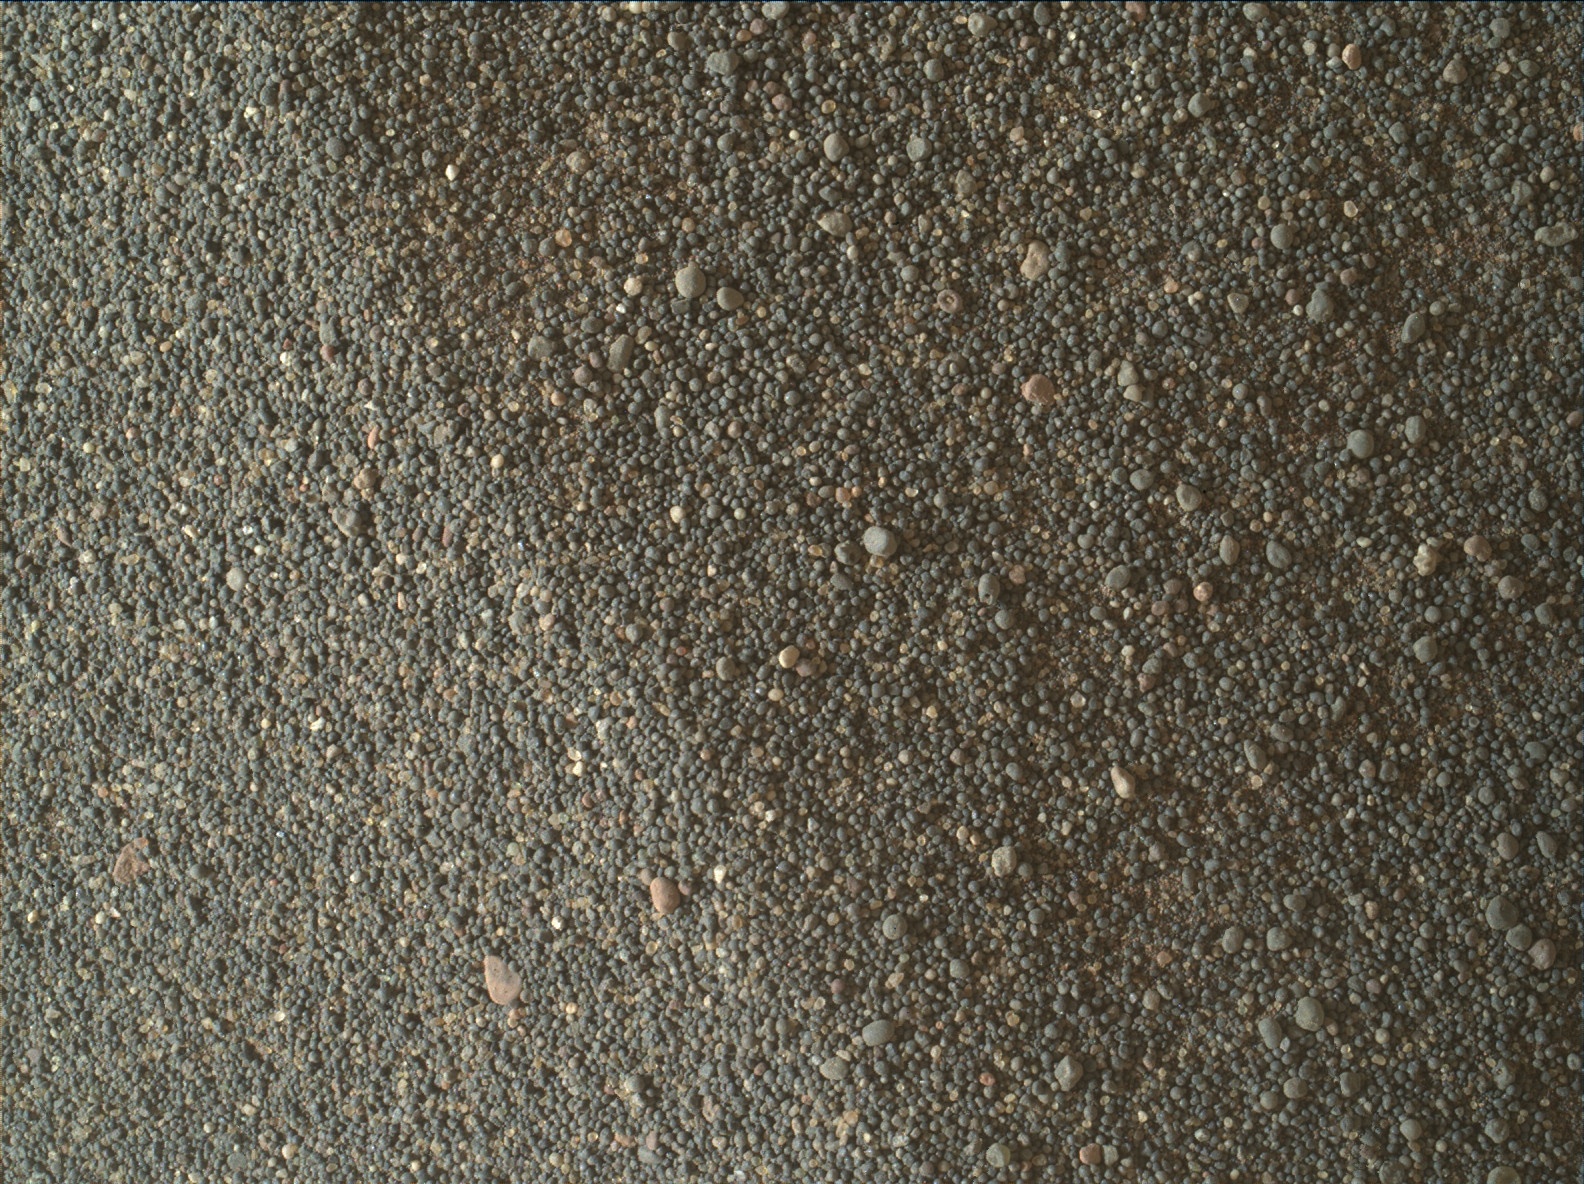 Nasa's Mars rover Curiosity acquired this image using its Mars Hand Lens Imager (MAHLI) on Sol 2992